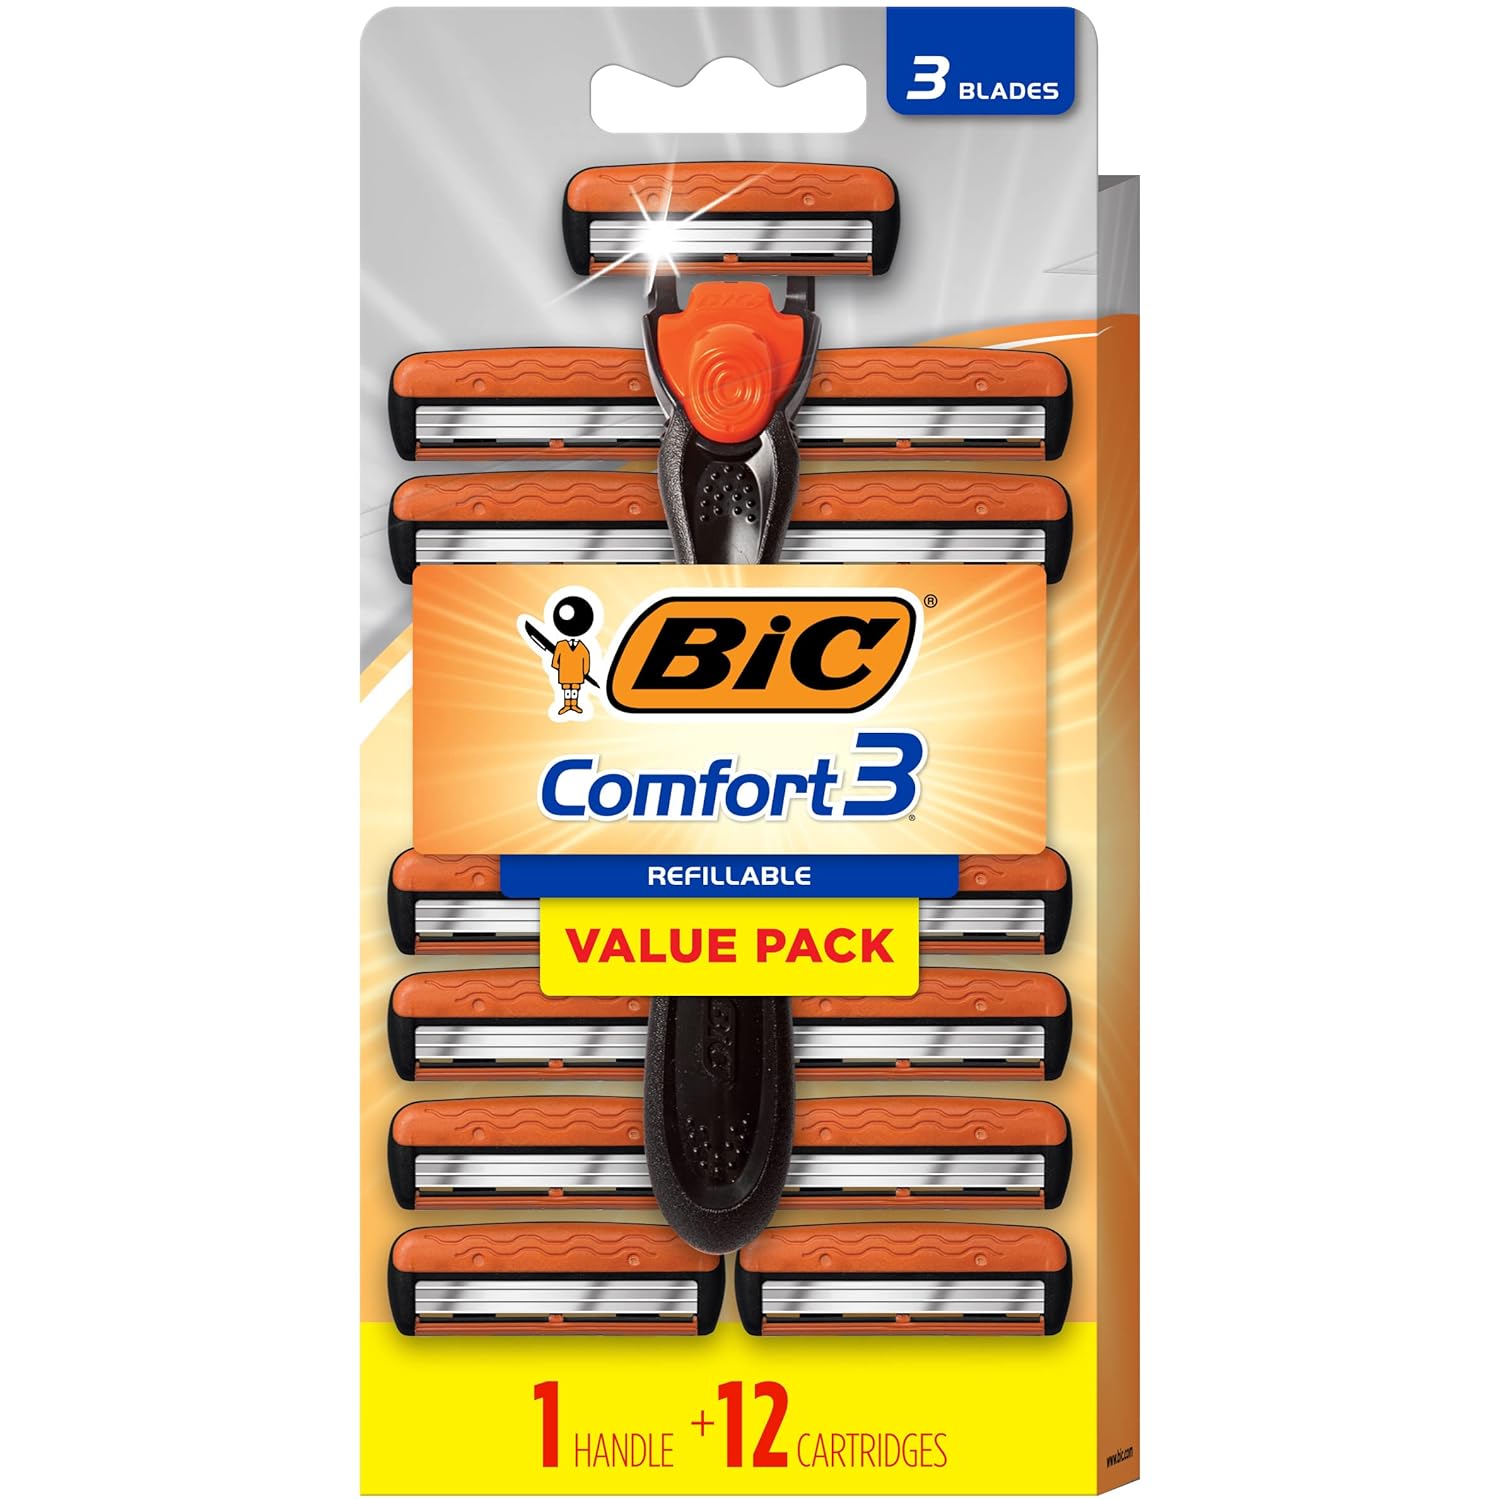 BIC Disposable Razors: 40% Off: 13-Piece BIC Comfort 3 Refillable 3-Blades Razors (Handle + 12 Cartridges) $5.50 & More w/ S&S + Free Shipping w/ Prime or on $35+